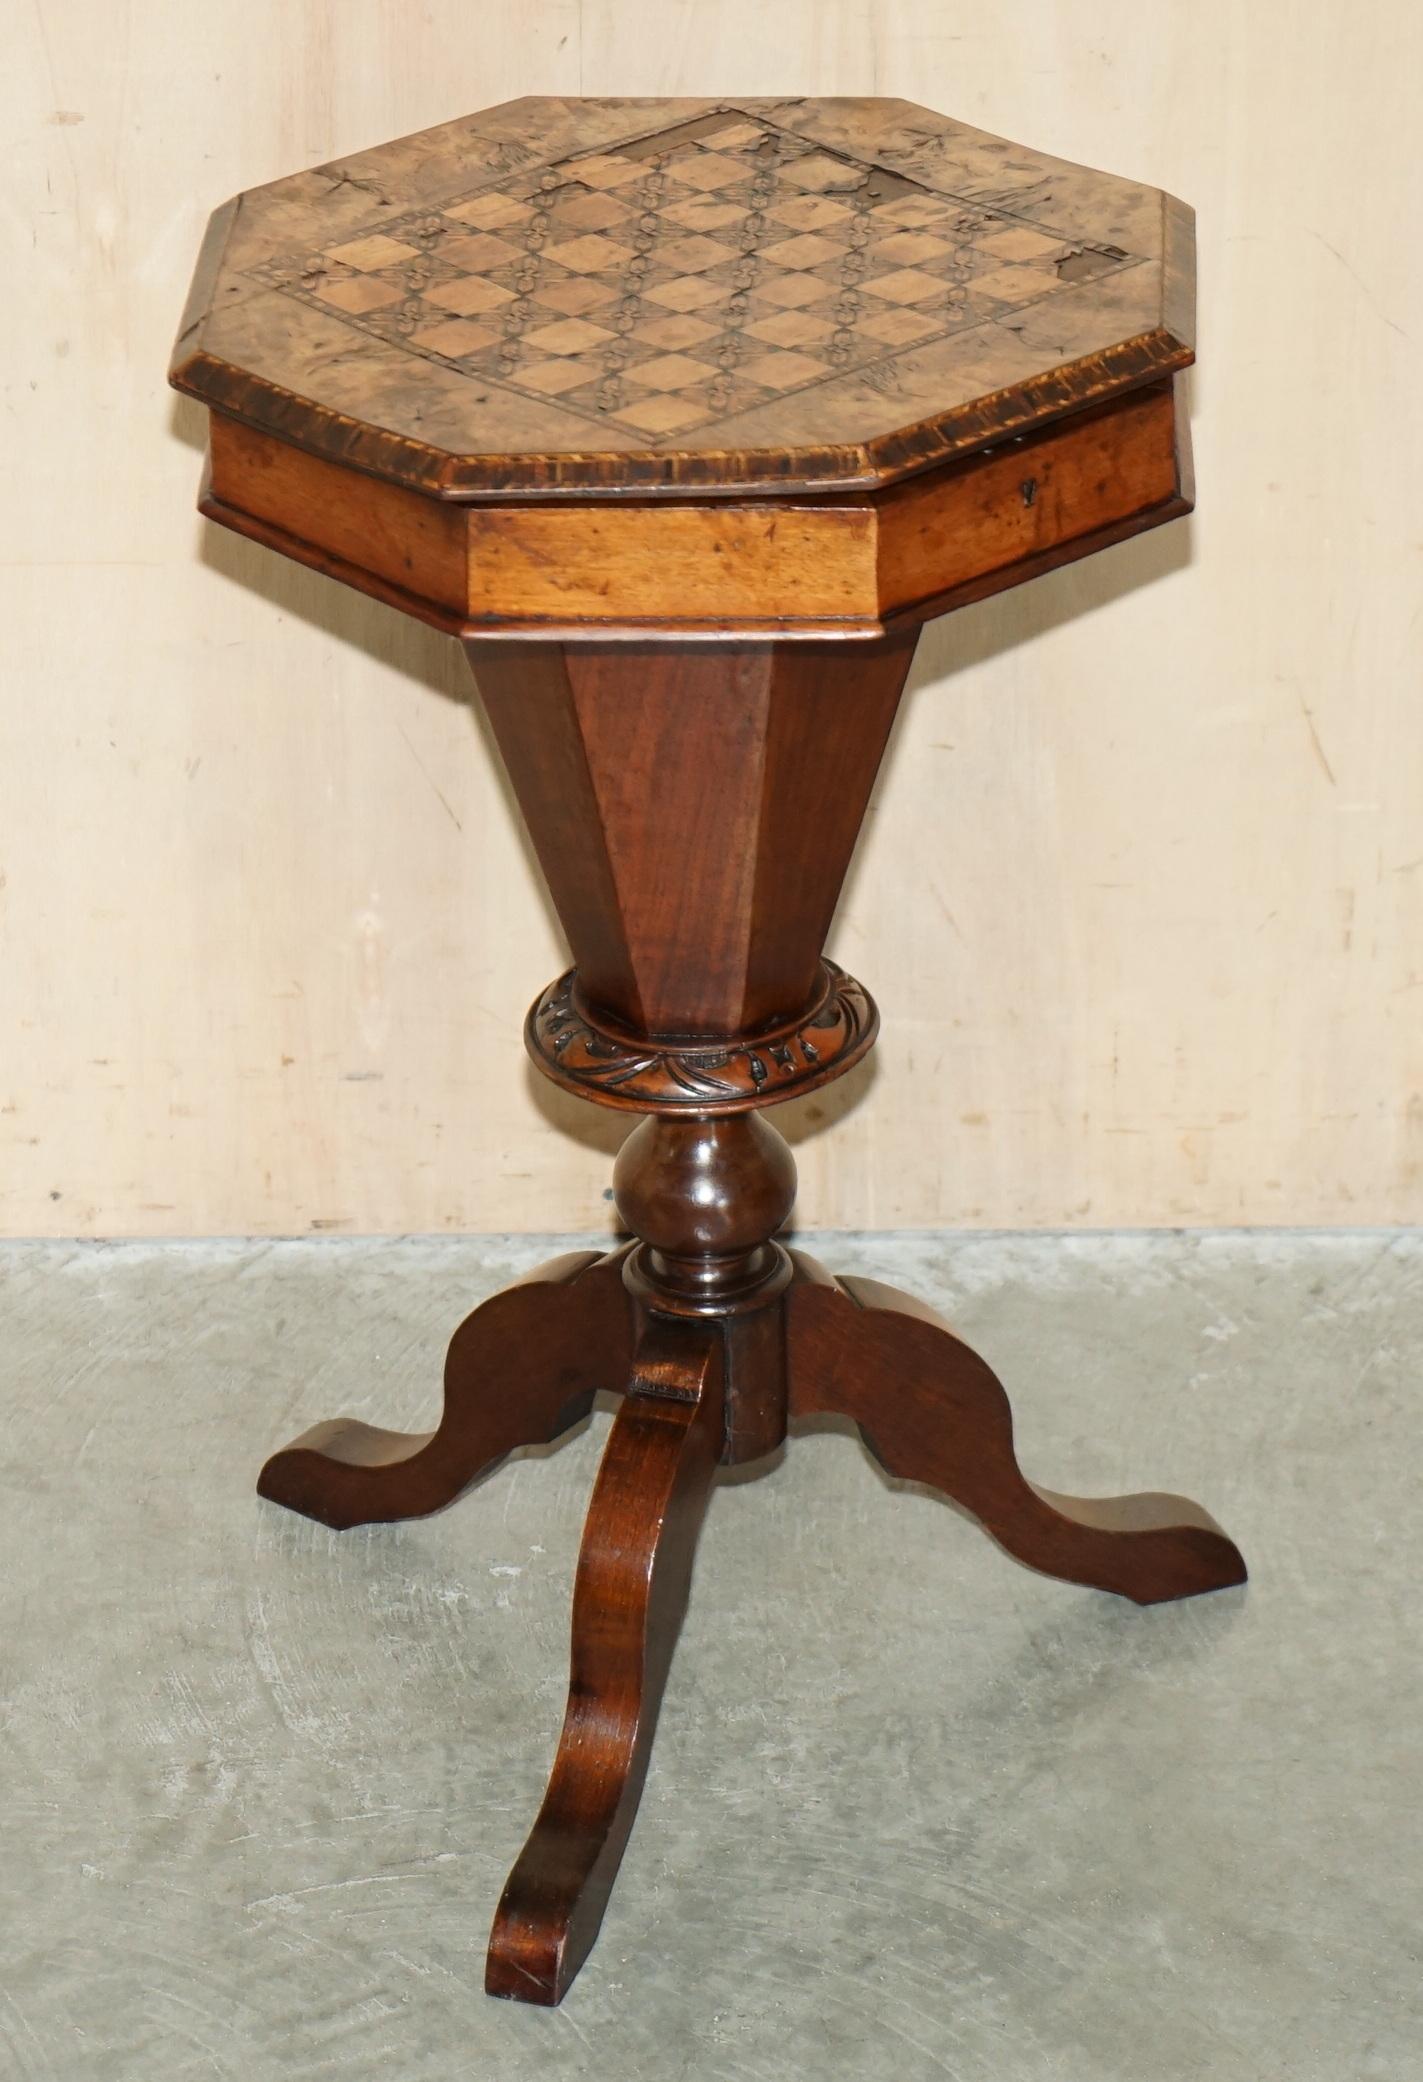 Royal House Antiques

Royal House Antiques is delighted to offer for sale this original Victorian circa 1860-1880 Burr Walnut, work sewing table with Chessboard top and a beautifully crafted base in distressed condition for restoration 

Please note